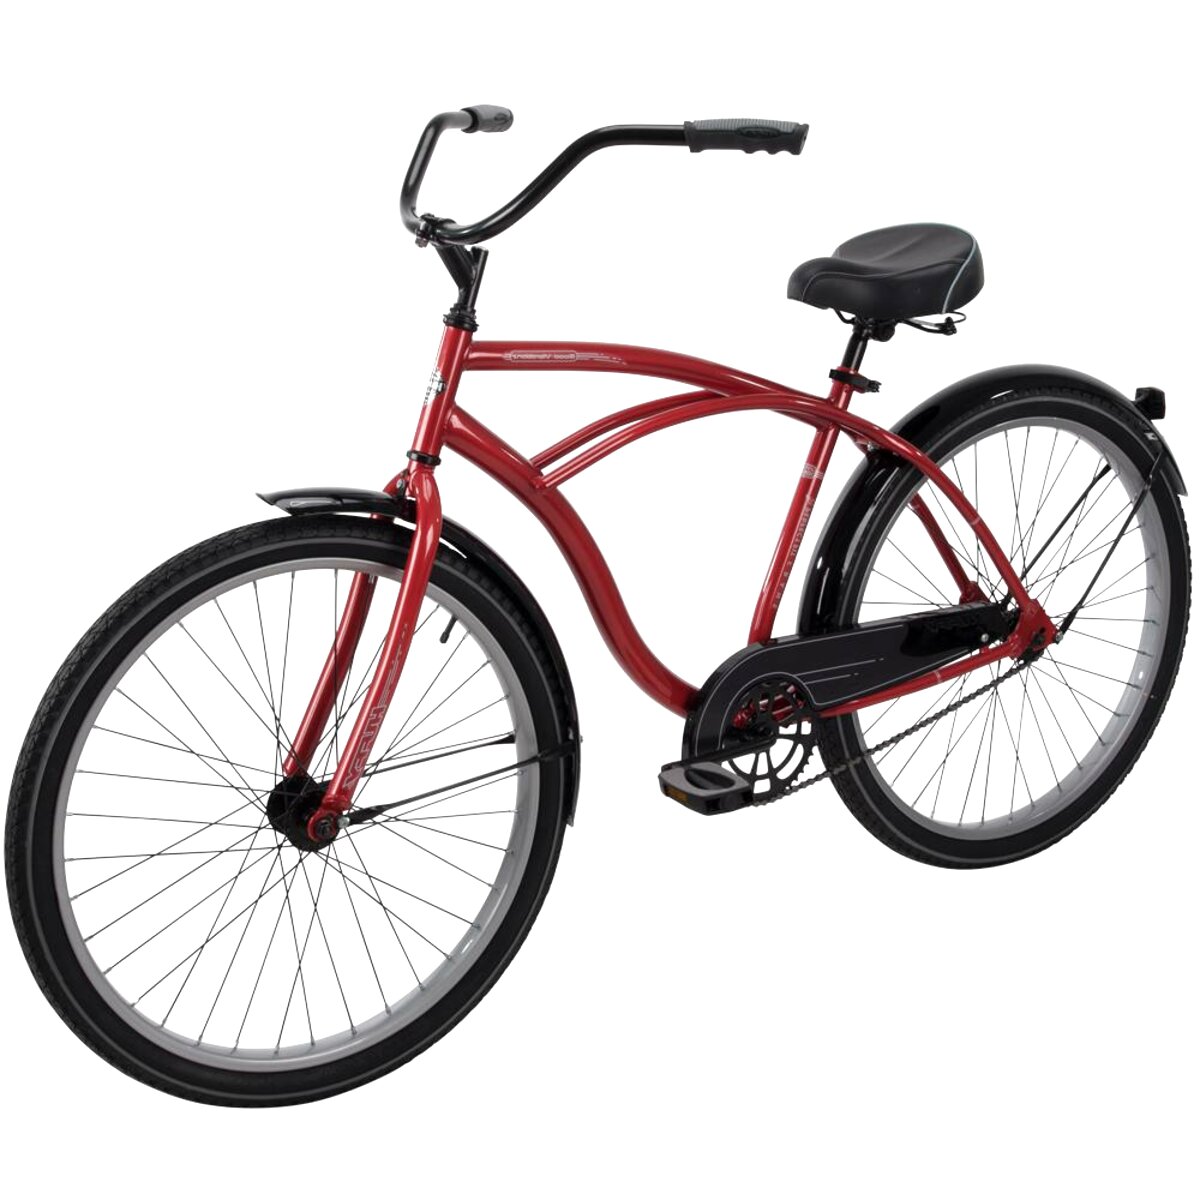 second hand cruiser bikes for sale